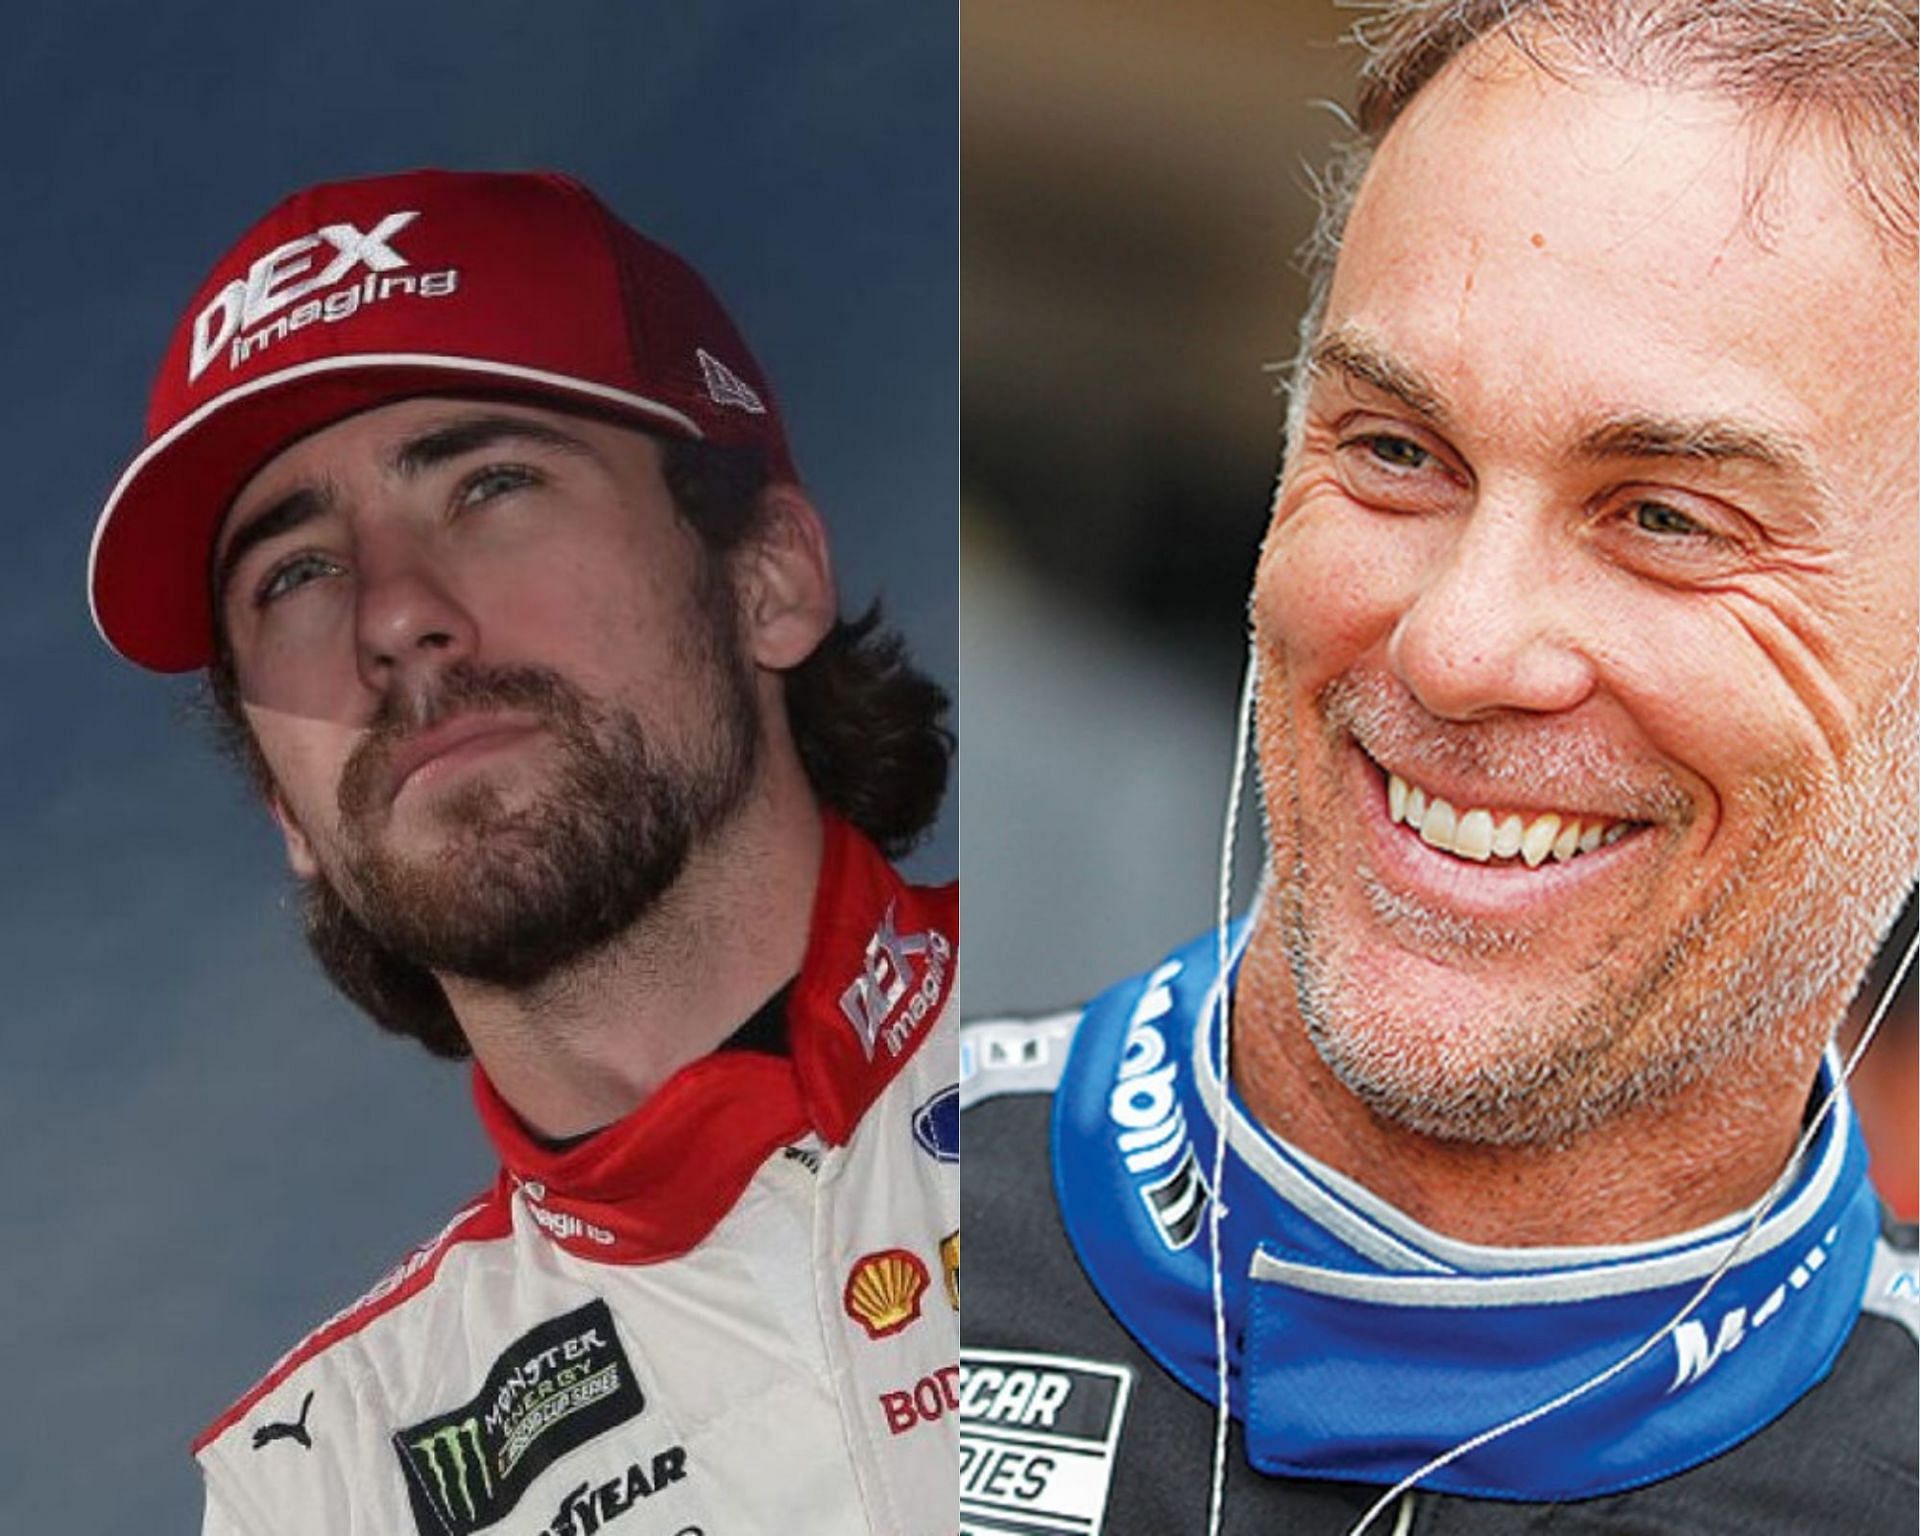 (L-R) NASCAR Cup Series drivers Ryan Blaney and Kevin Harvick.